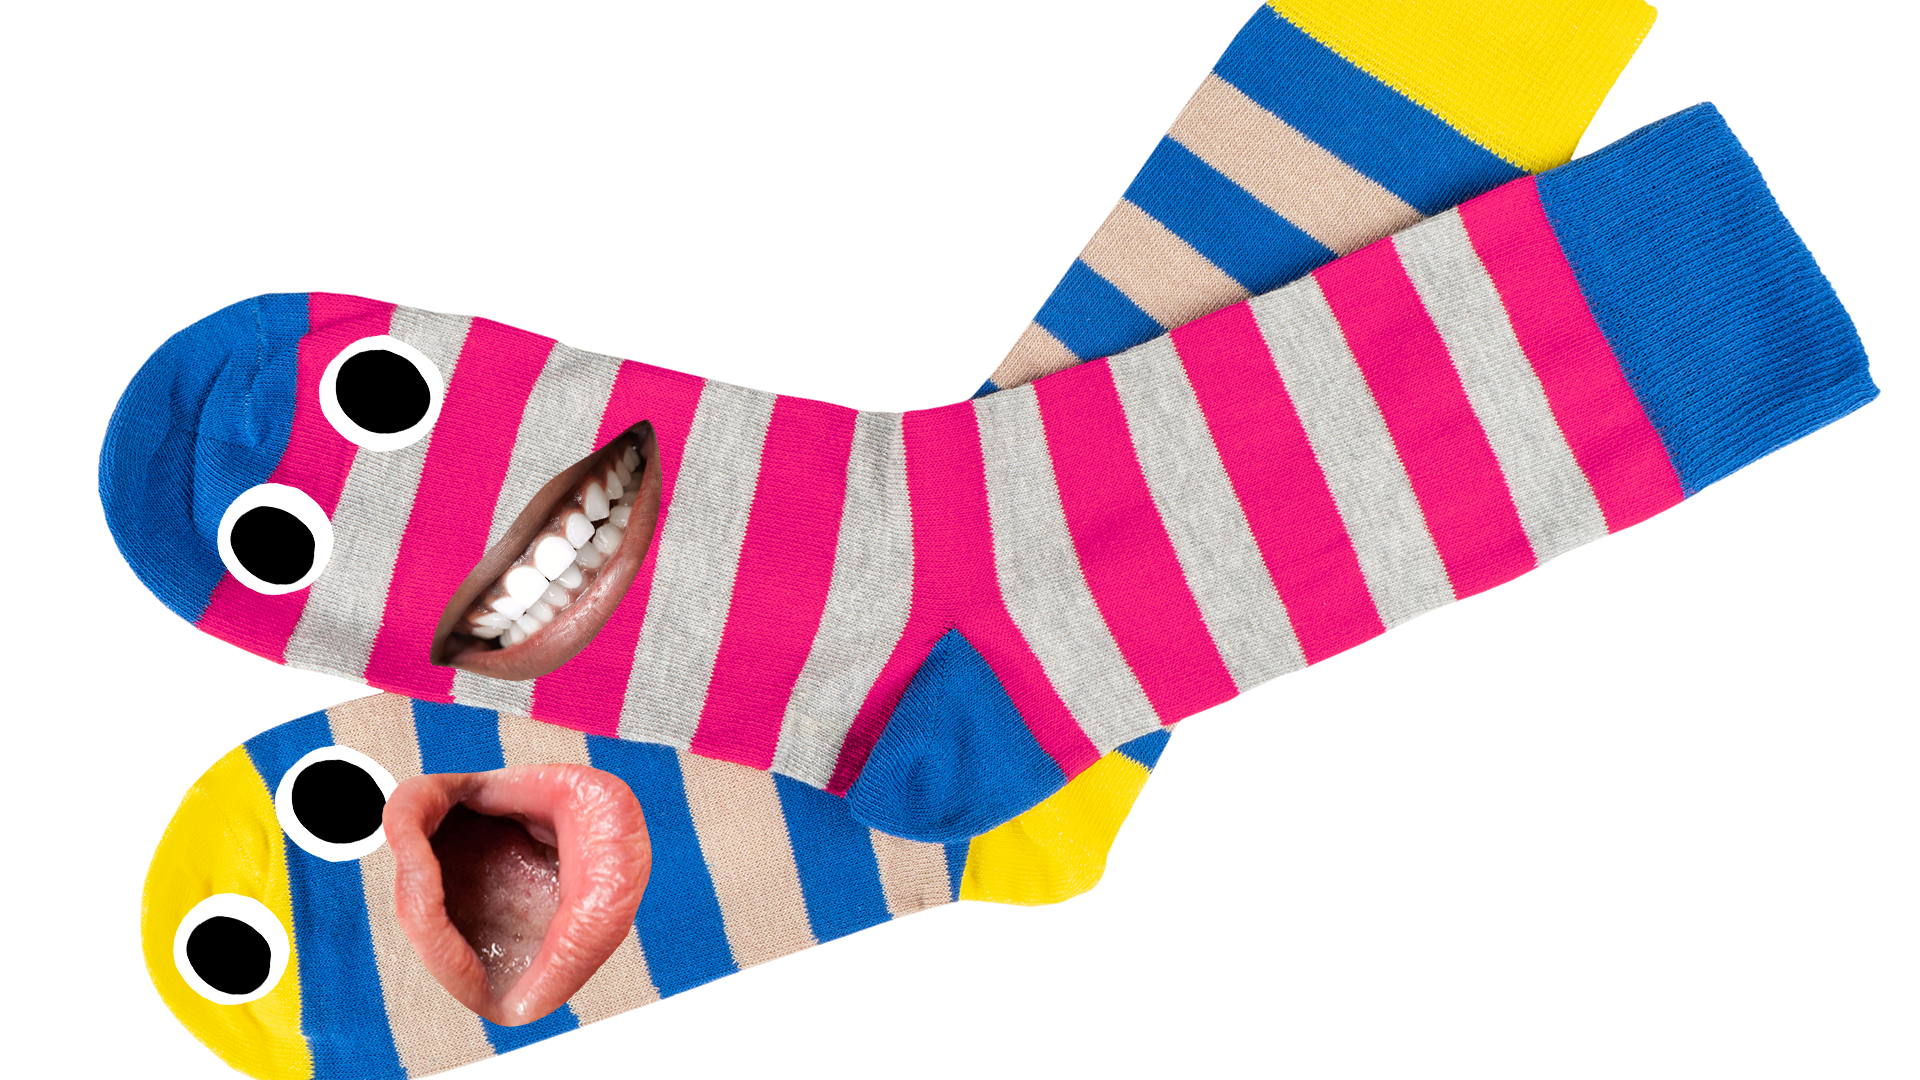 Pair of mismatched stripy socks on white background with silly faces